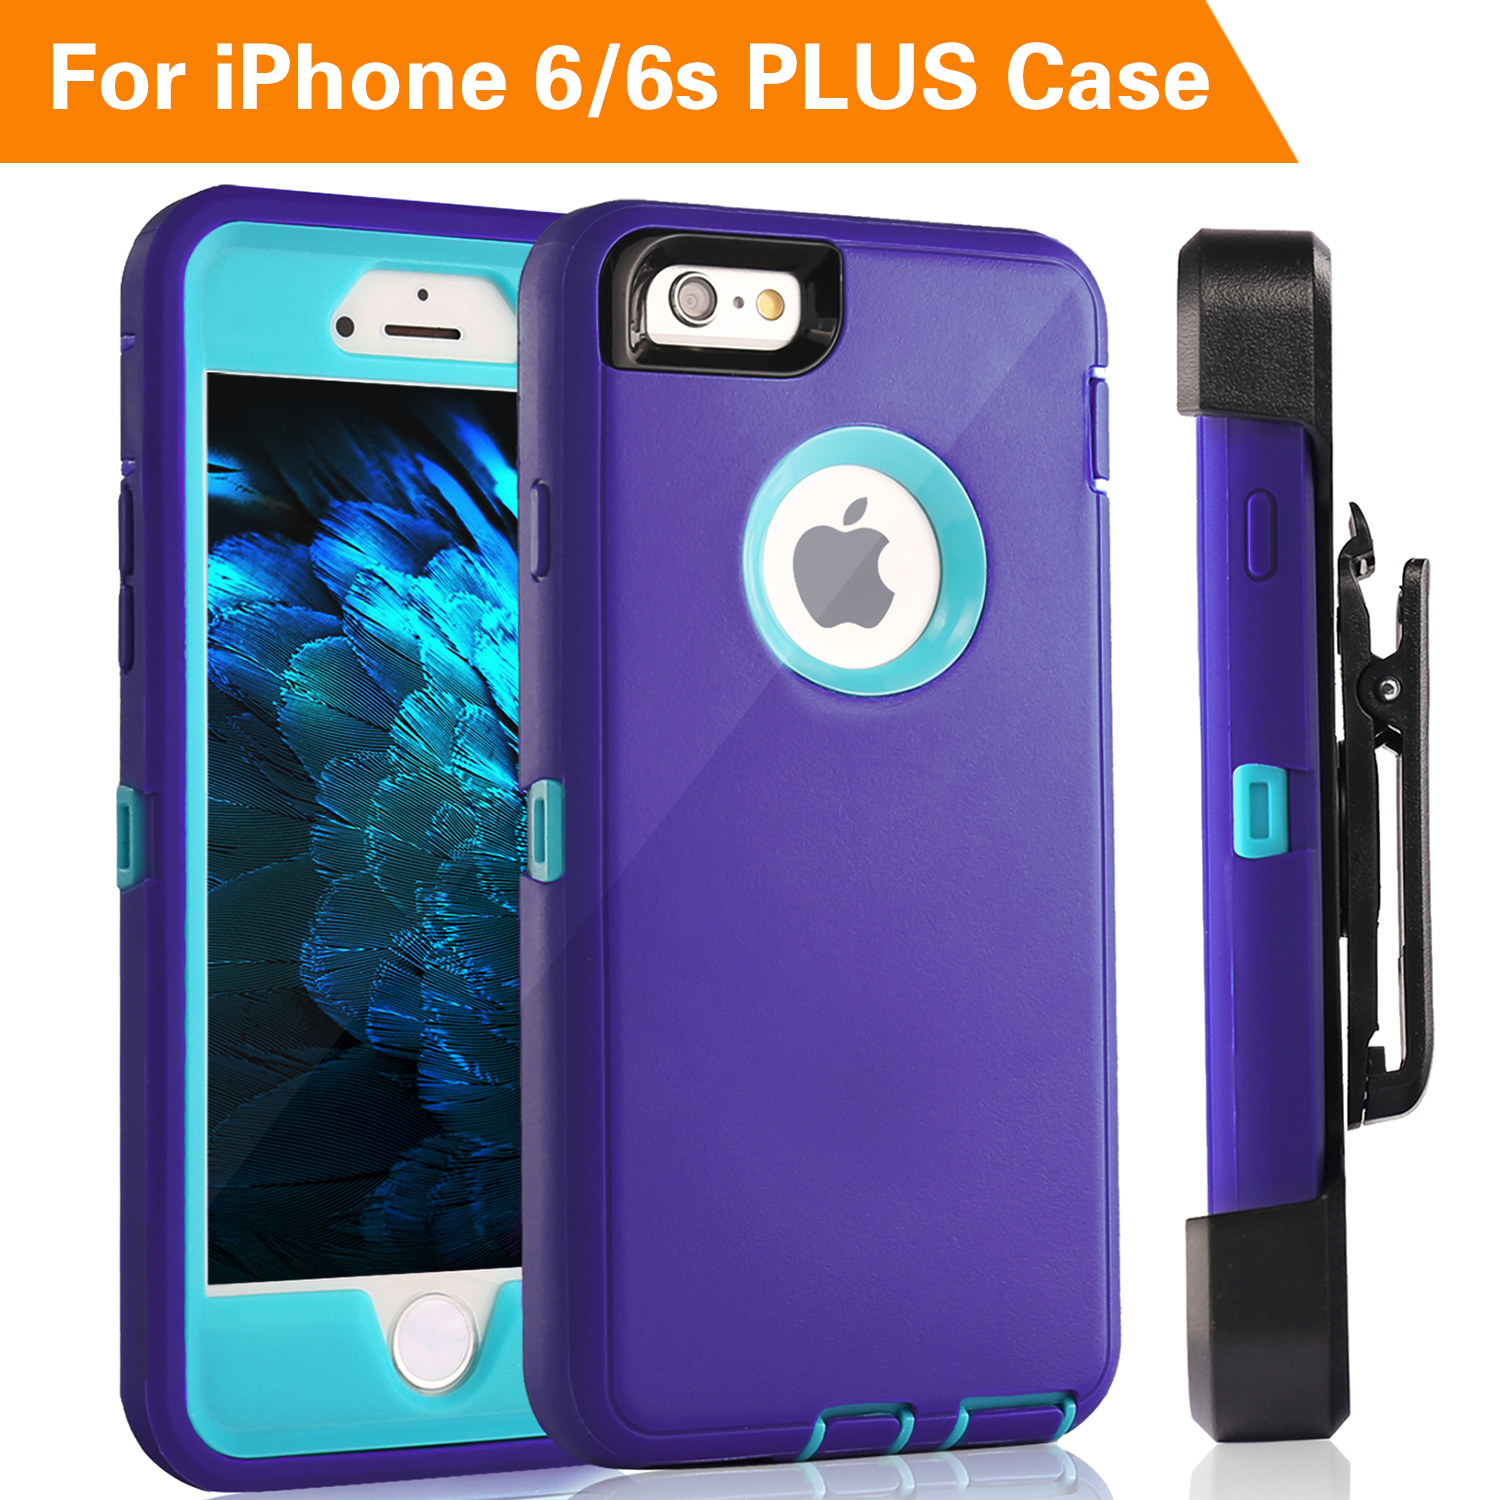 iPhone 6S Plus Case,FOGEEK Protective Case Heavy Duty Cover Compatible for iPhone 6 Plus & iPhone 6S Plus 5.5 inch 360 Degree Rotary Belt Clip & Kickstand(Purple/Blue)